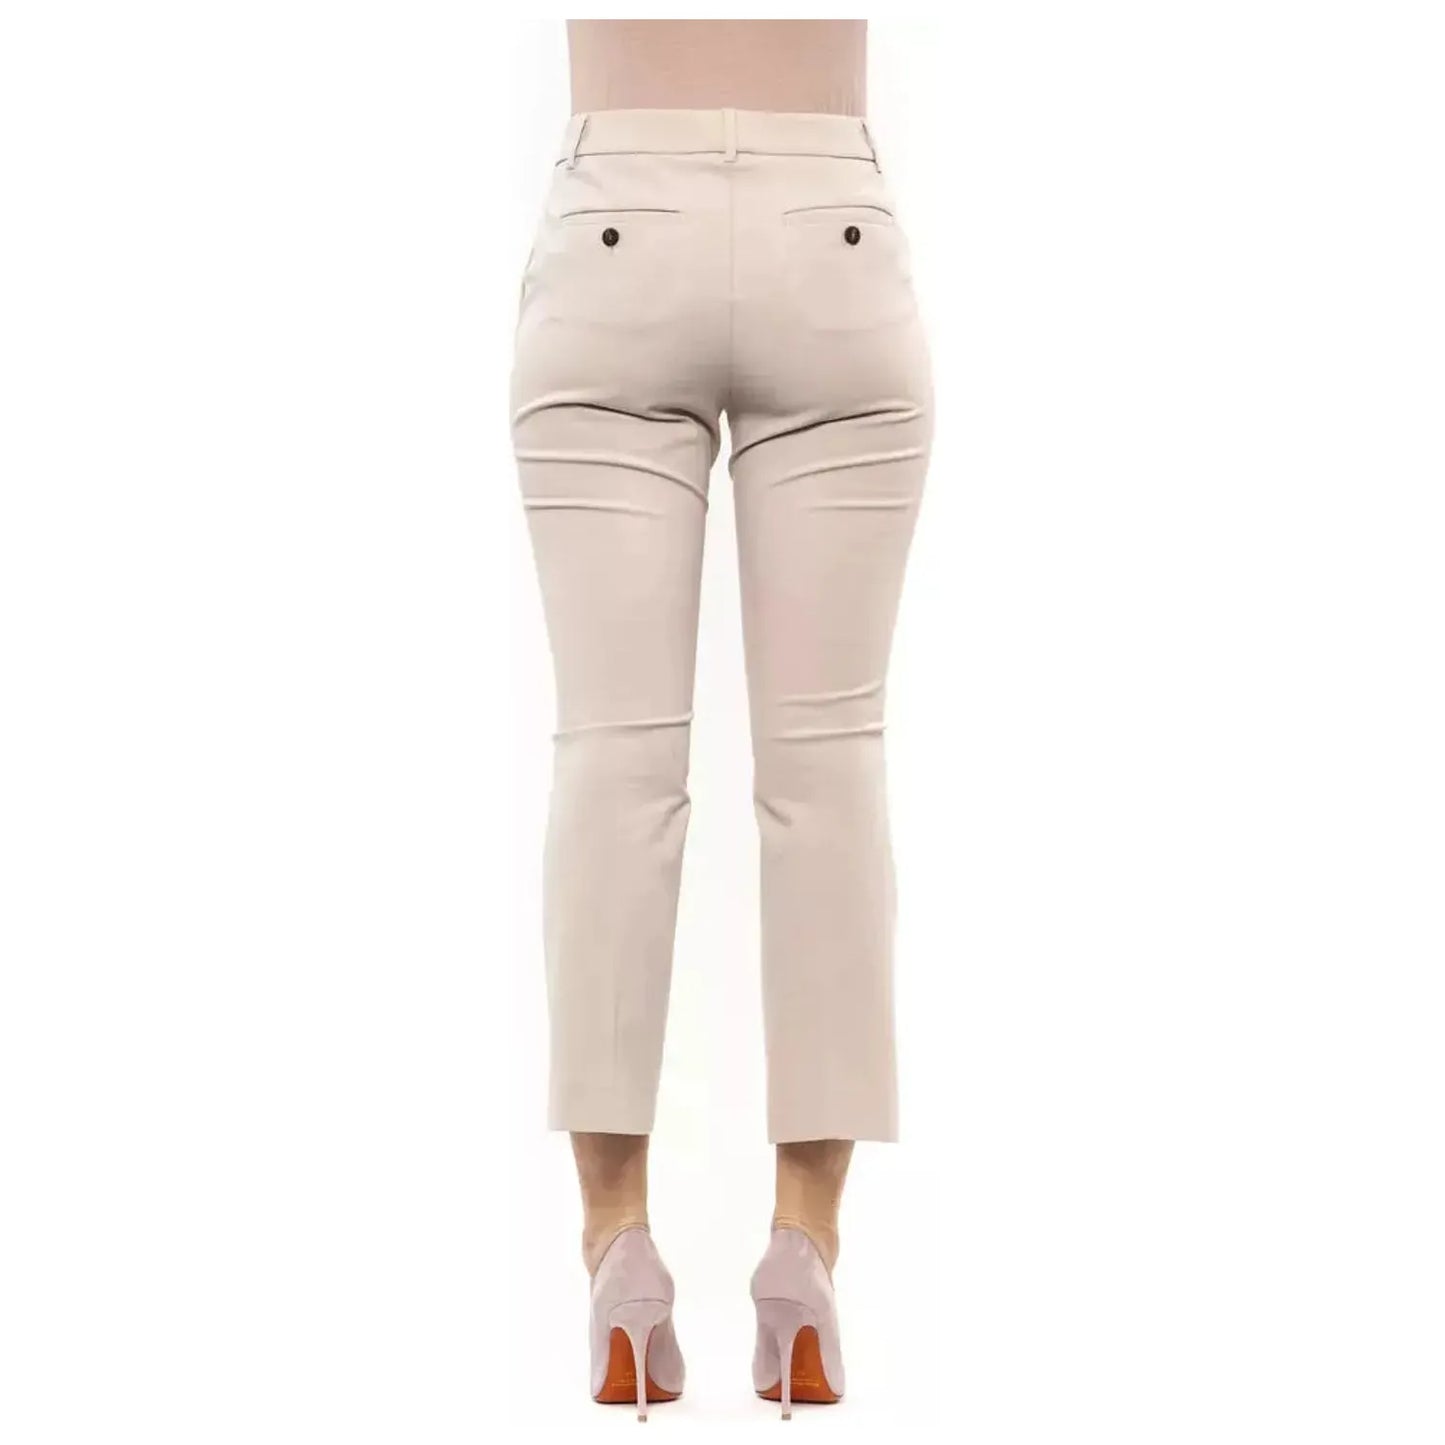 Peserico Elegant Beige Stretch Slim Trousers Jeans & Pants beige-jeans-pant-58 stock_product_image_20526_1377631528-16-79eb3be0-399.webp